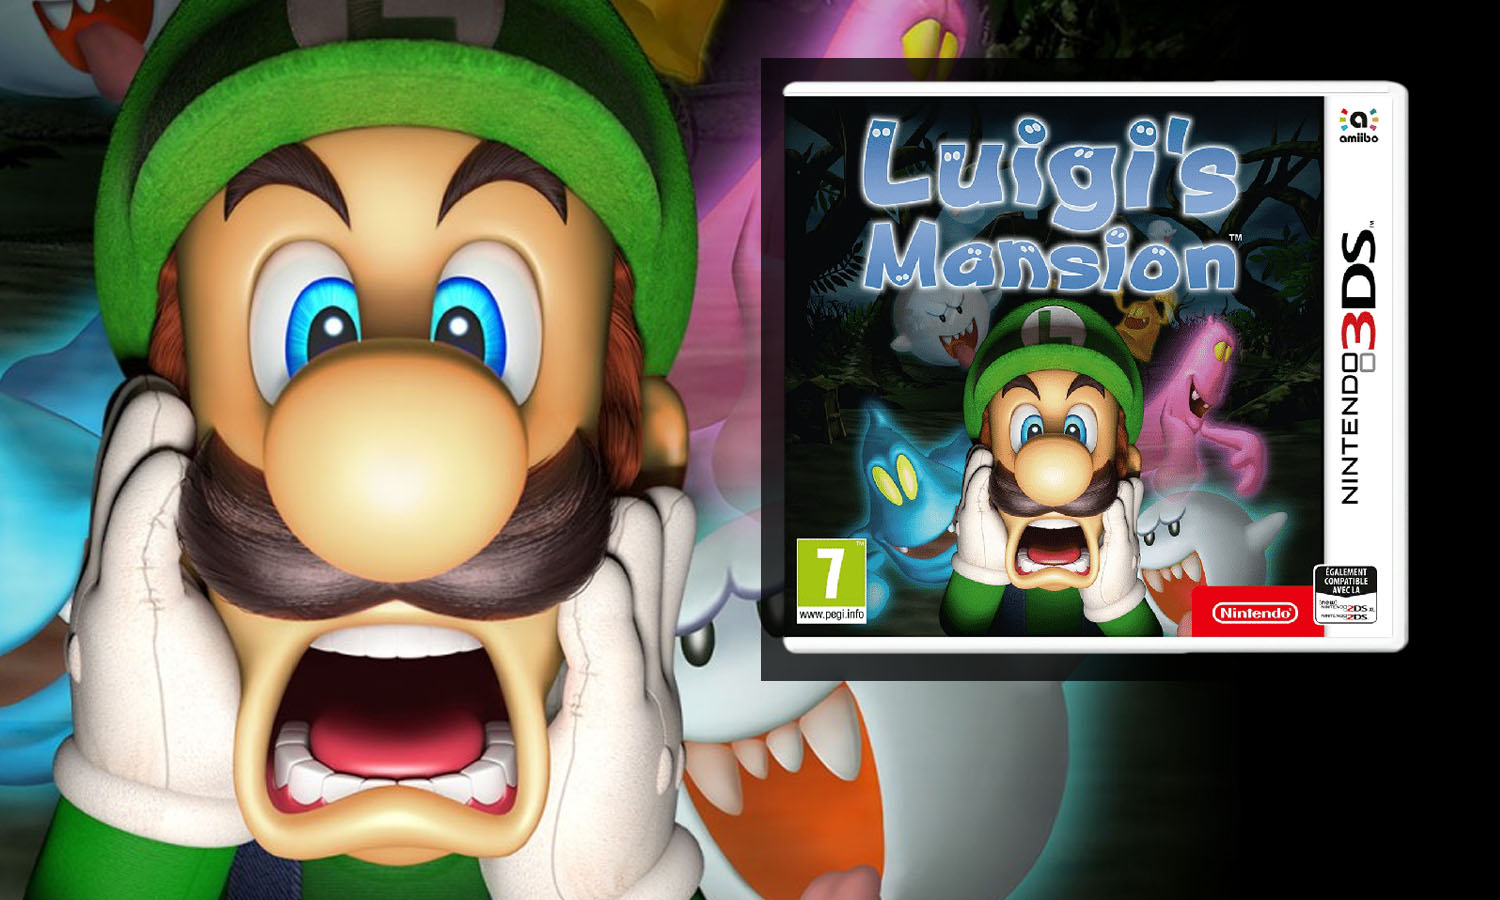 download luigis mansion two for free